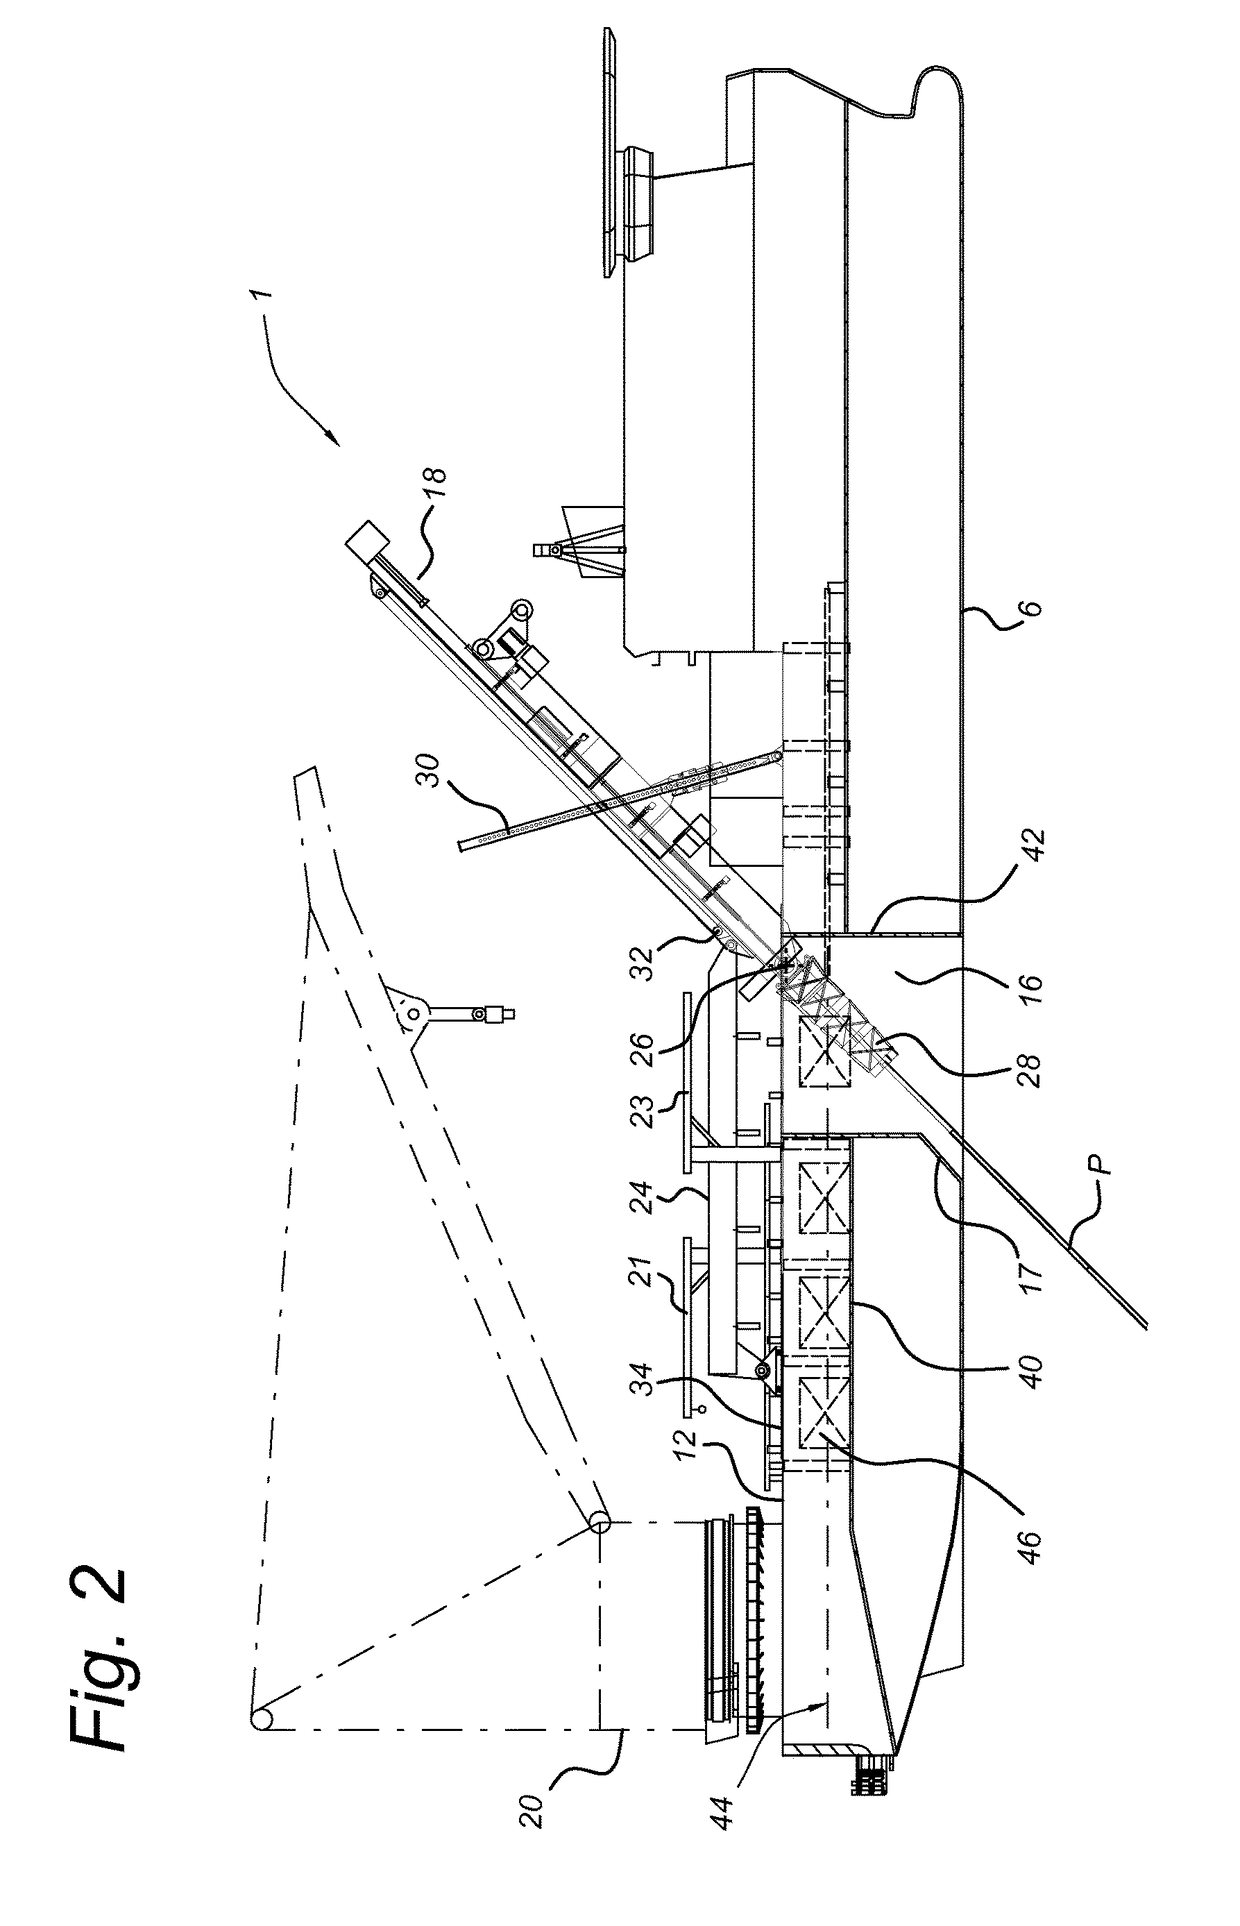 Multi-activity pipe-laying vessel